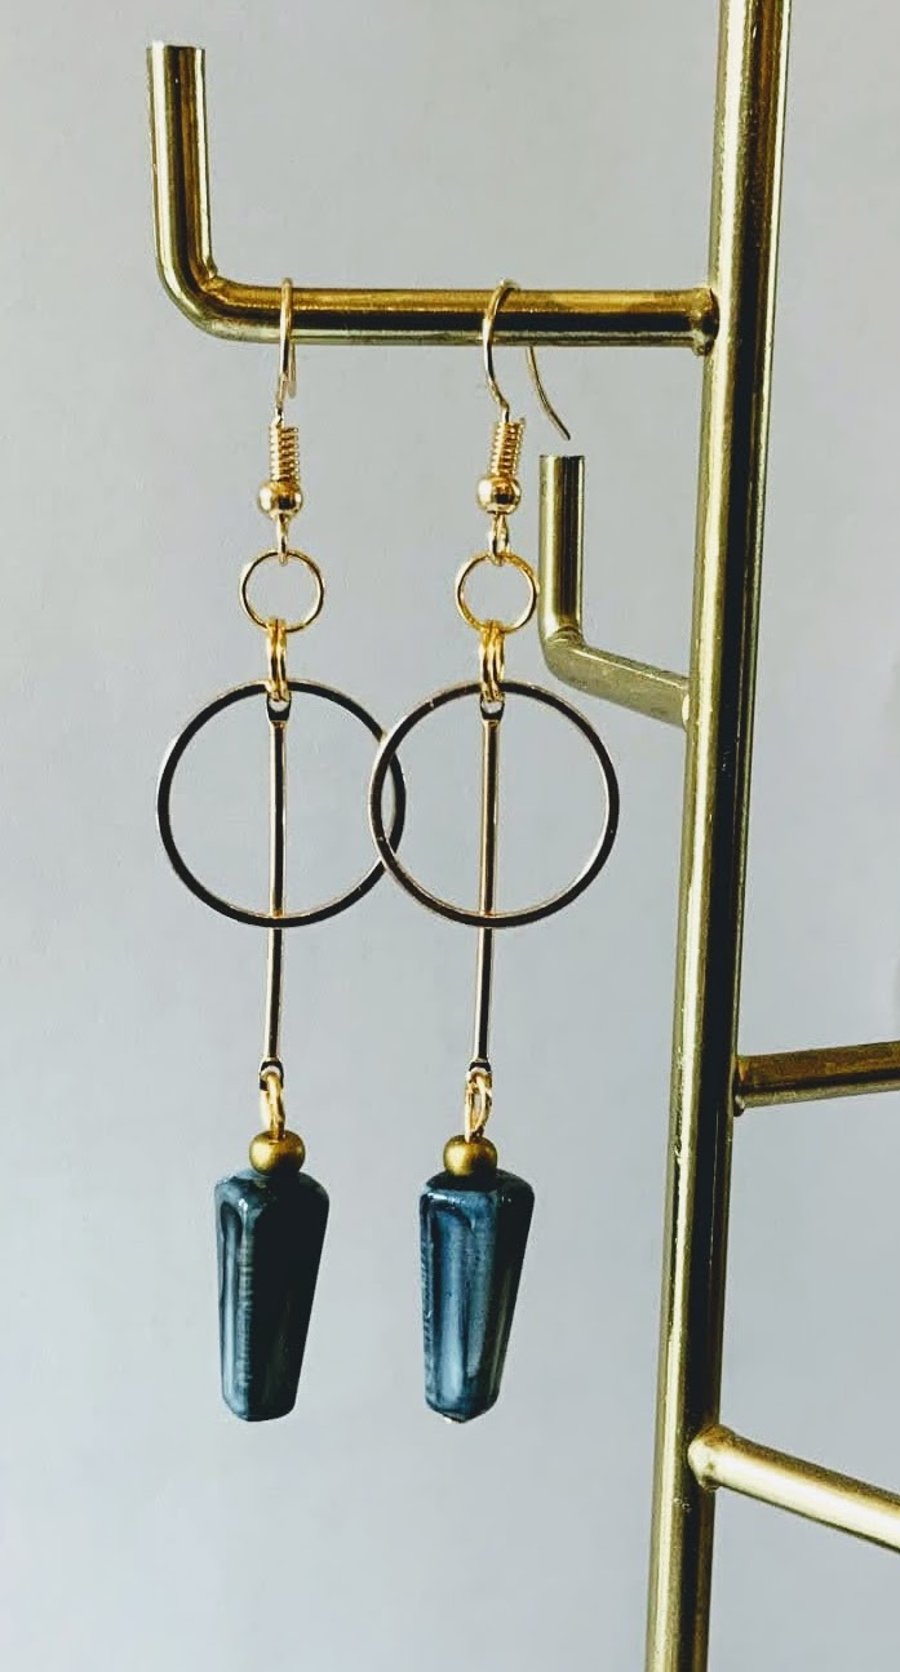 Gold hoop earrings with hanging rod and teal geometric bead.